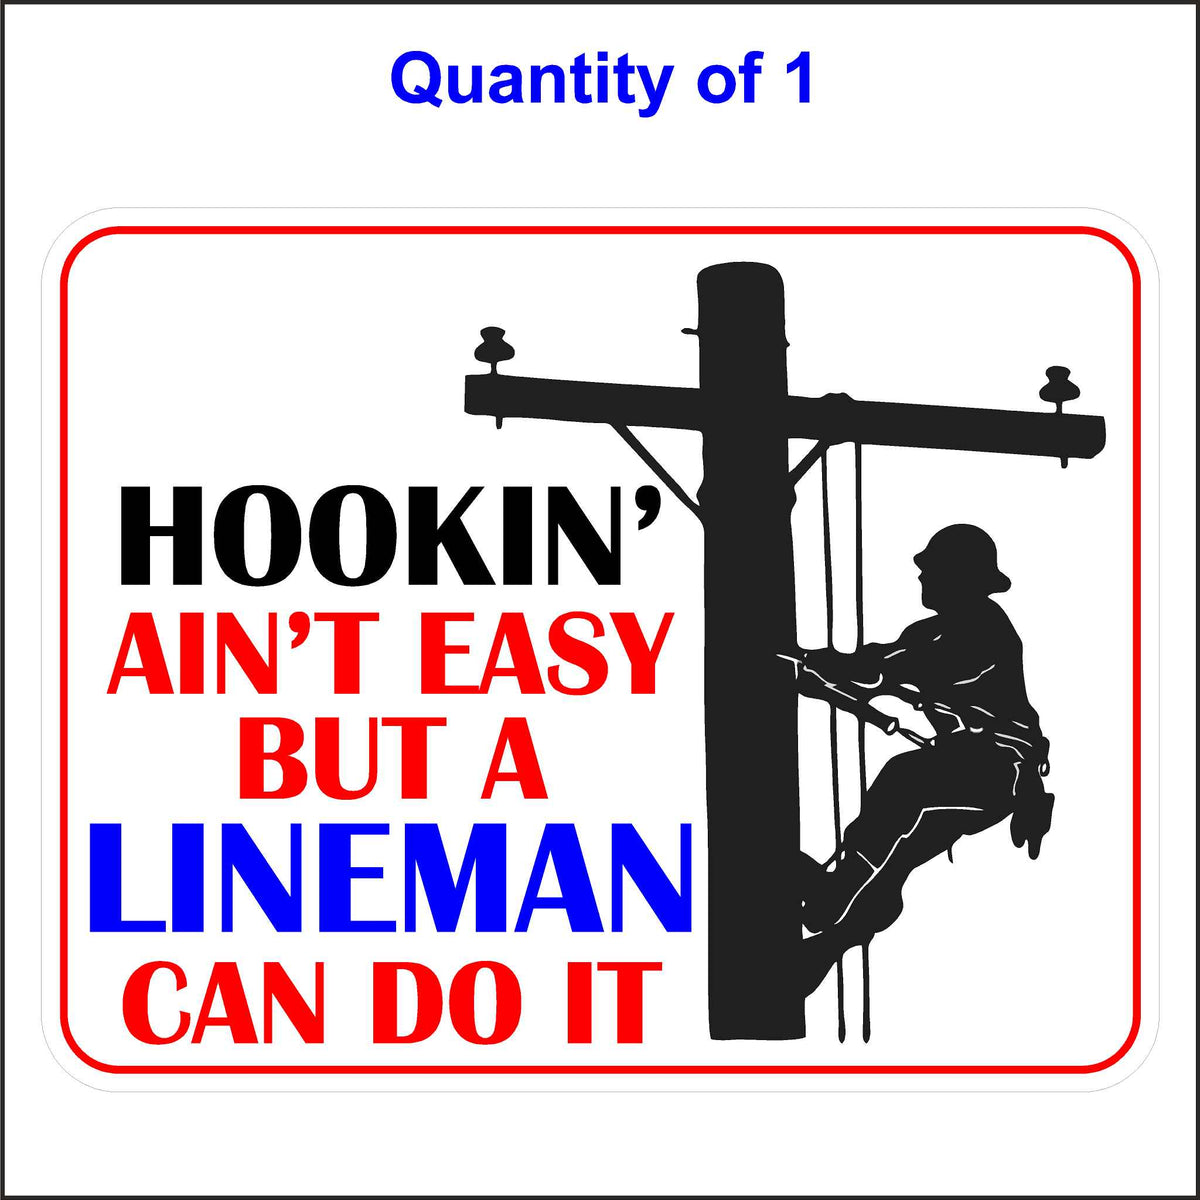 Lineman Sticker Printed With a Picture of a Lineman on a Pole. The Words “Hookin’ Ain’t Easy but a Lineman Can Do It” Are Printed in Red and Blue.